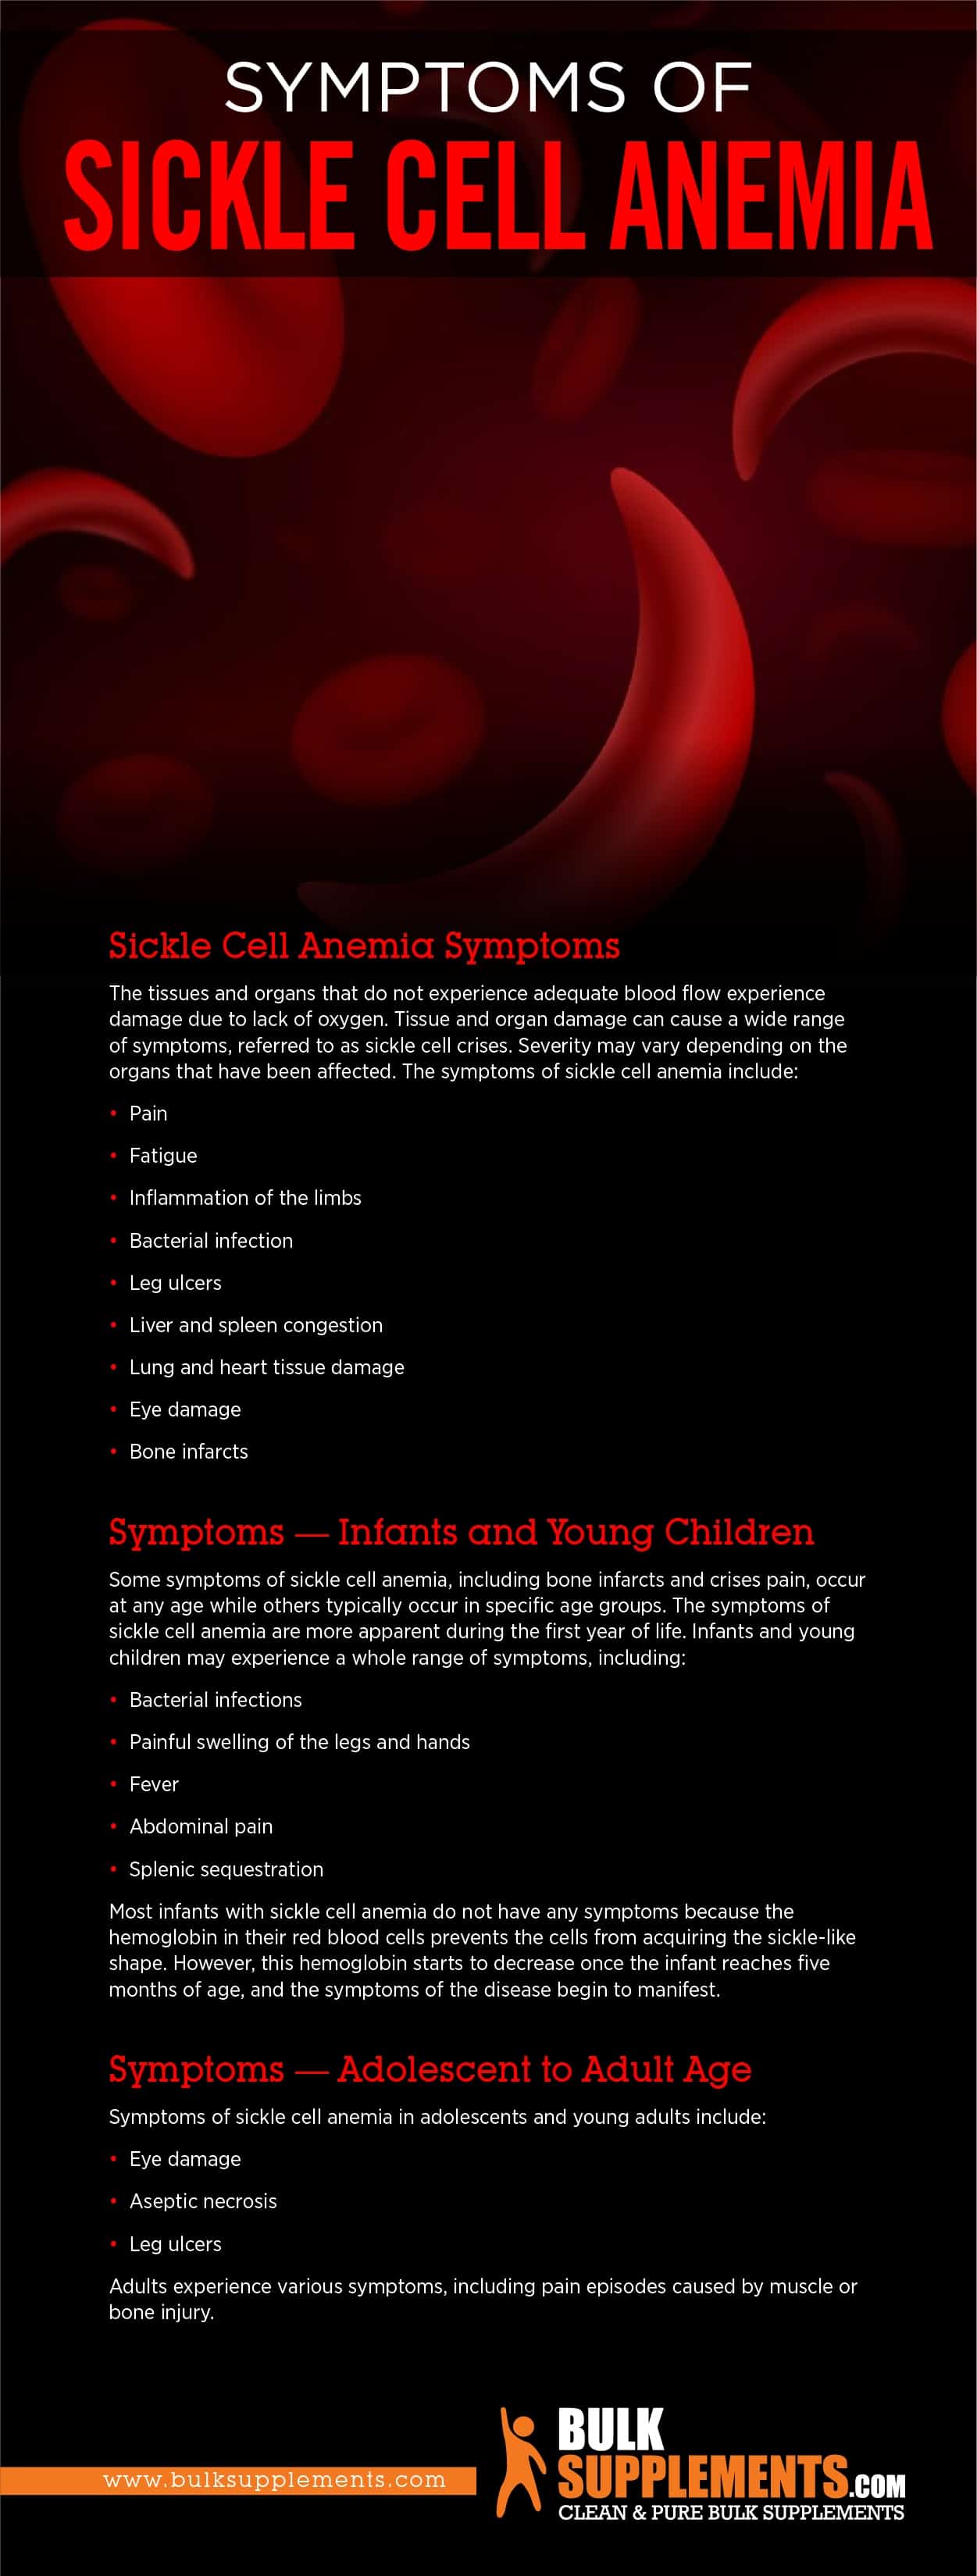 Sickle Cell Anemia Symptoms